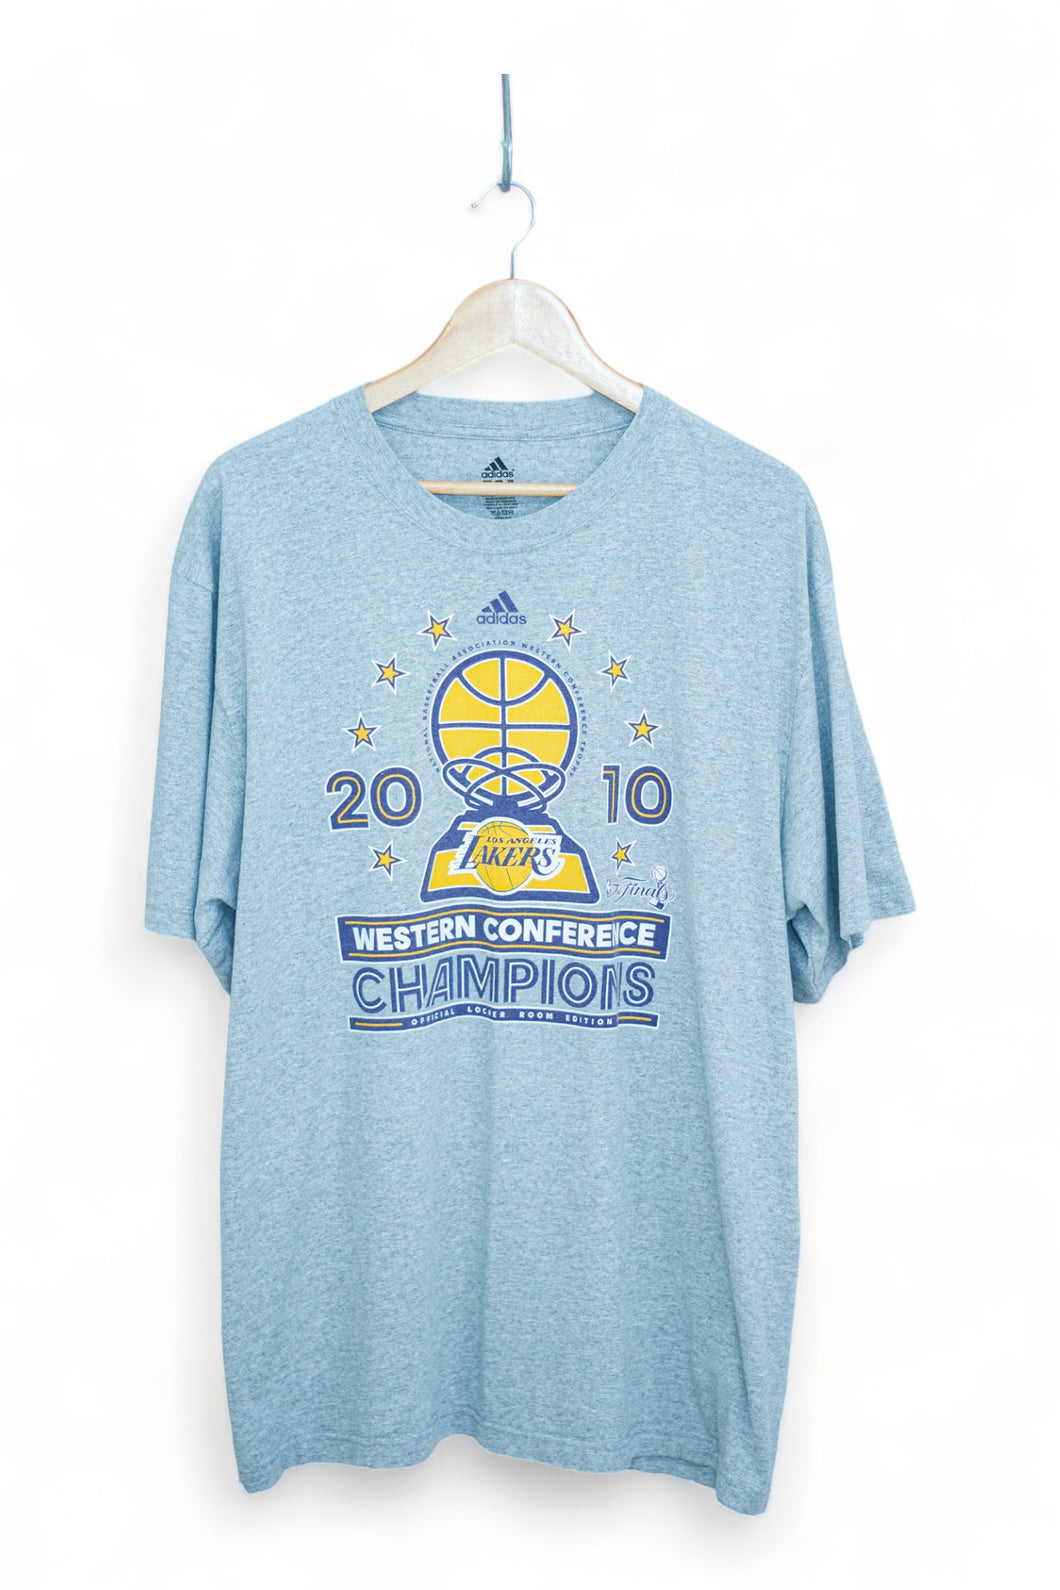 Los Angeles Lakers - 2010 NBA Western Conference Champions Adidas T-Shirt (XXL)